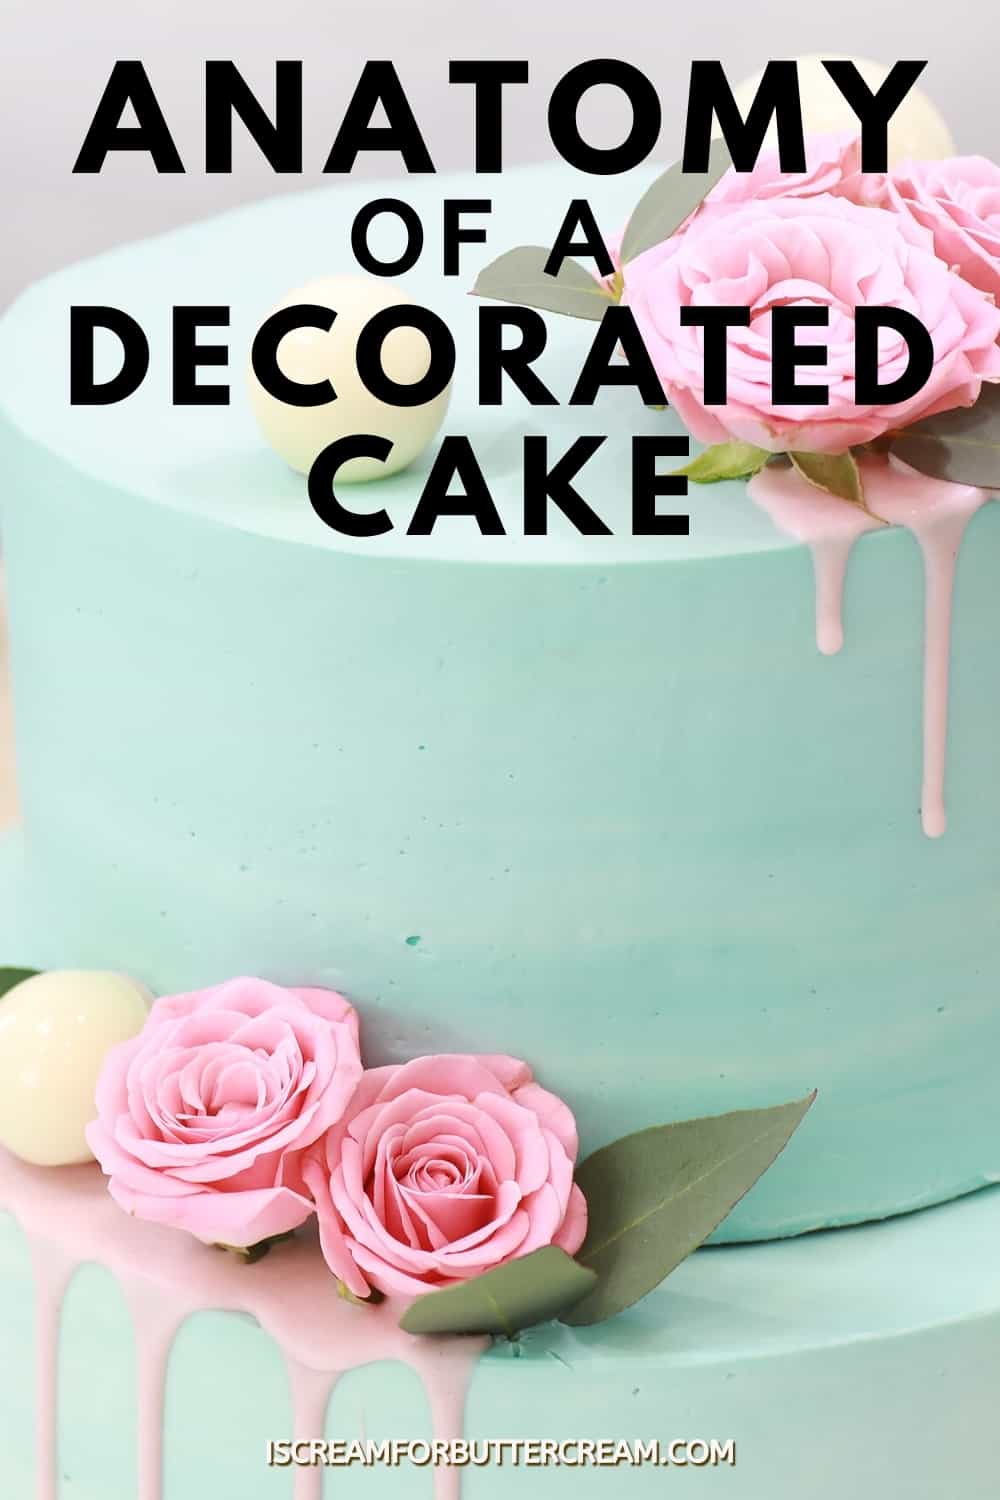 Anatomy of a Decorated Cake (for beginners)